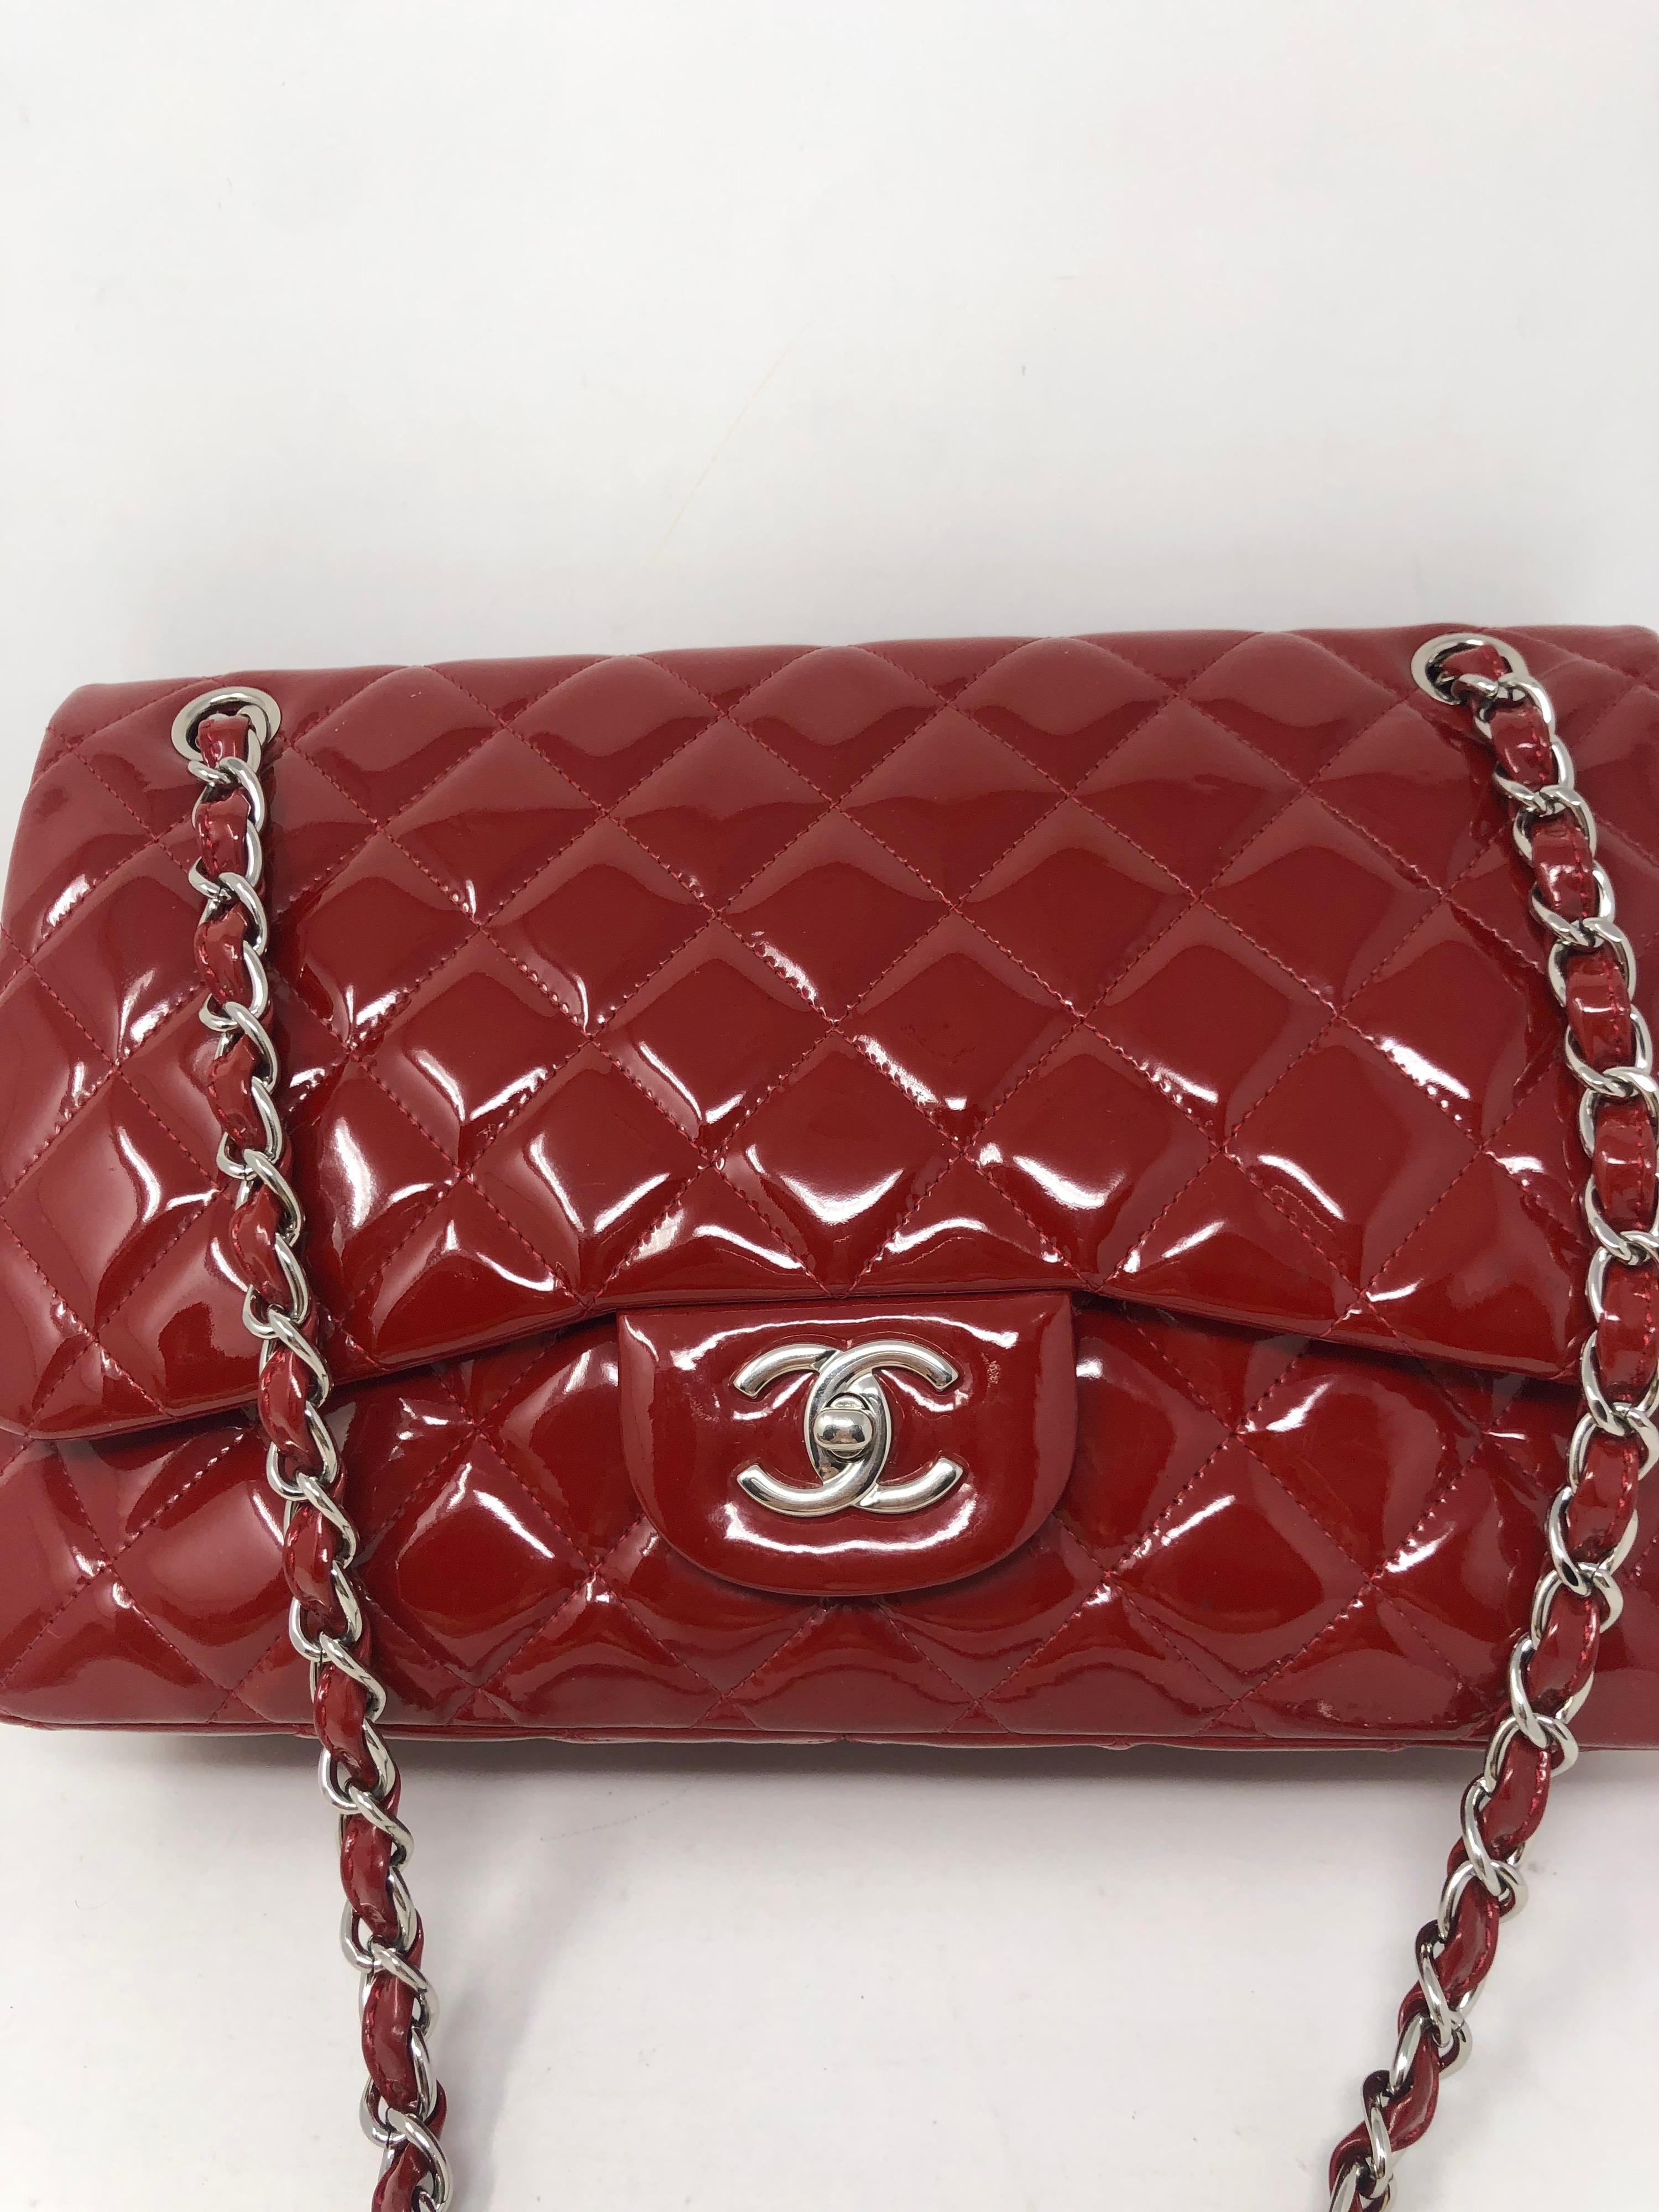 Chanel Red Jumbo Patent Leather Bag. Double flap silver hardware. Cherry red color. Good condition. Can be worn crossbody and doubled as a shoulder bag. Includes authenticity card. Guaranteed authentic. 